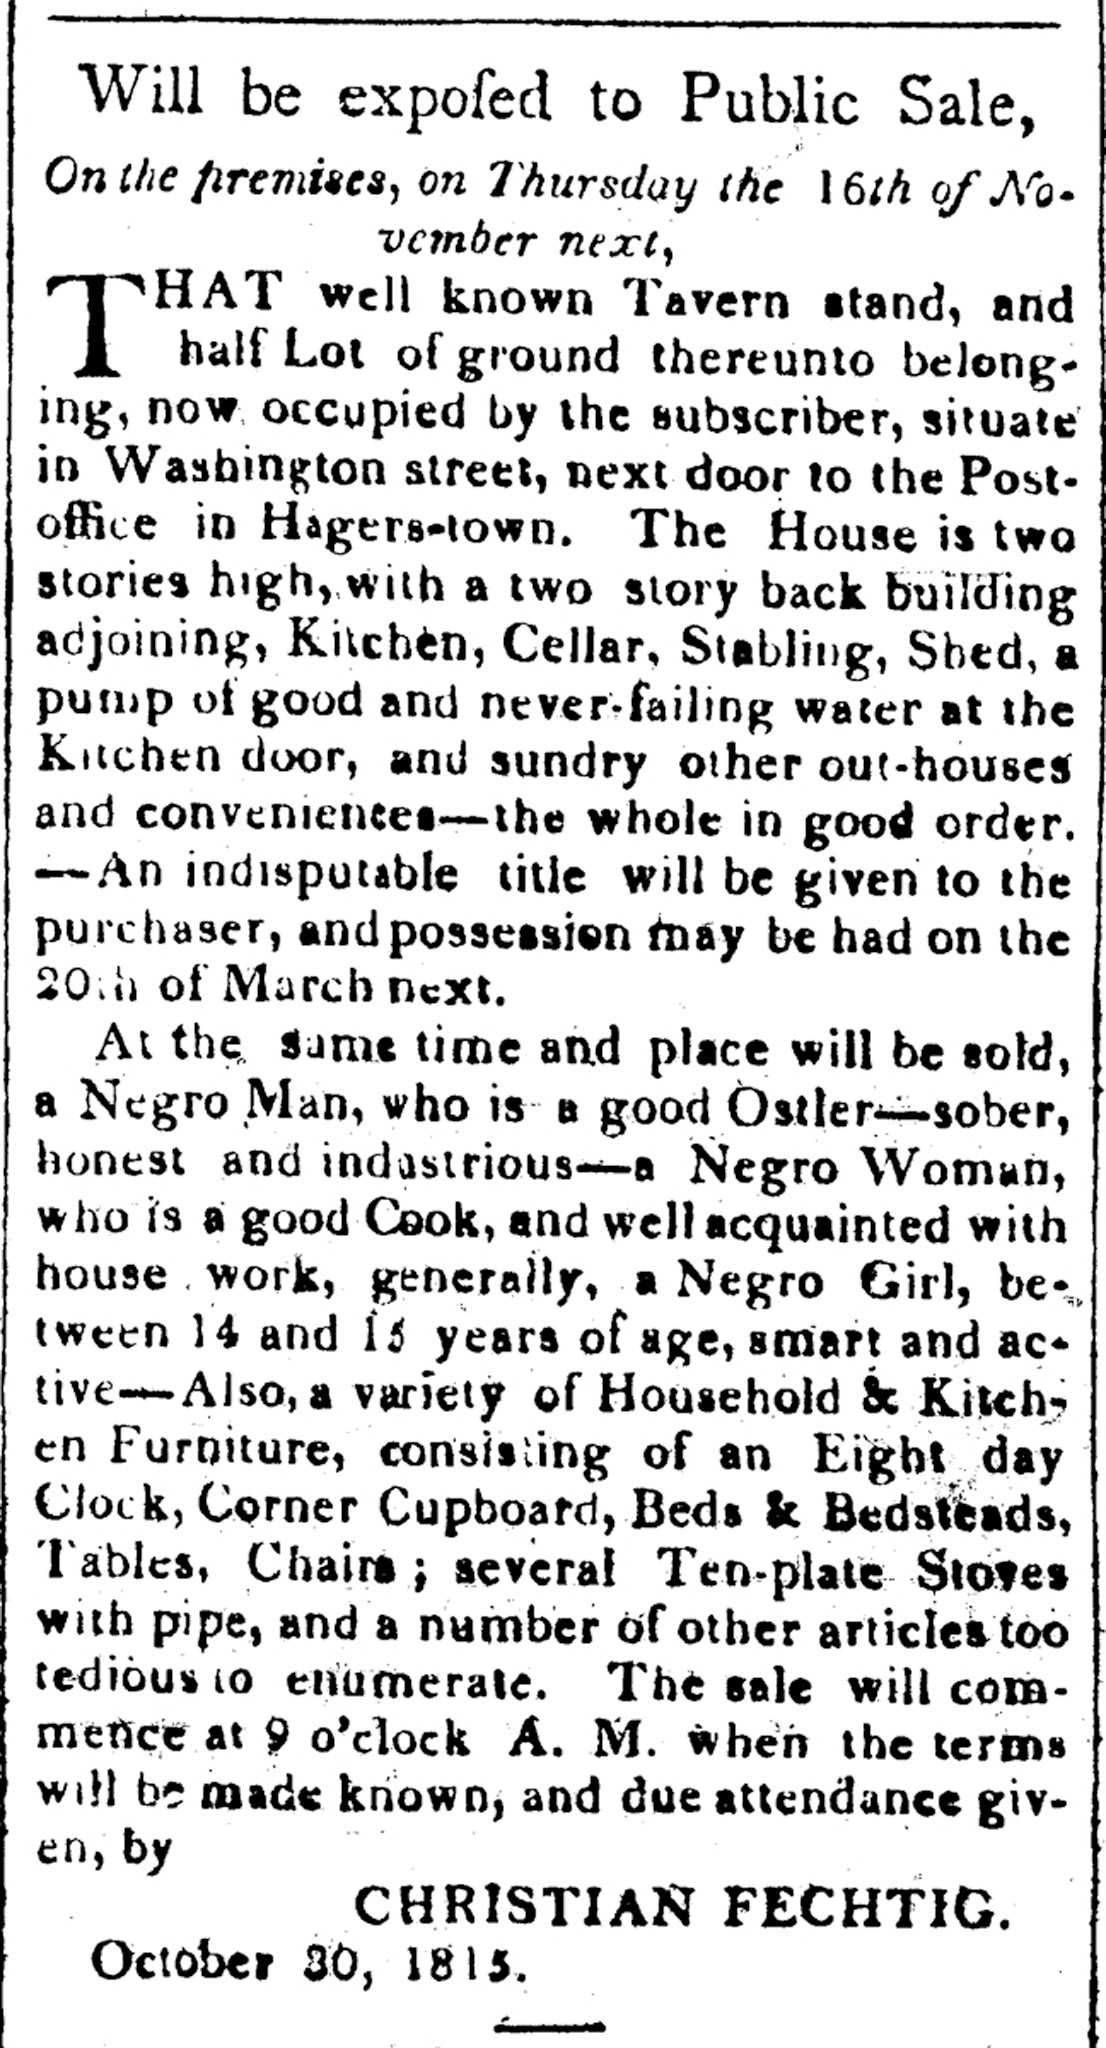 Newspaper advertisement for the sale of two enslaved persons